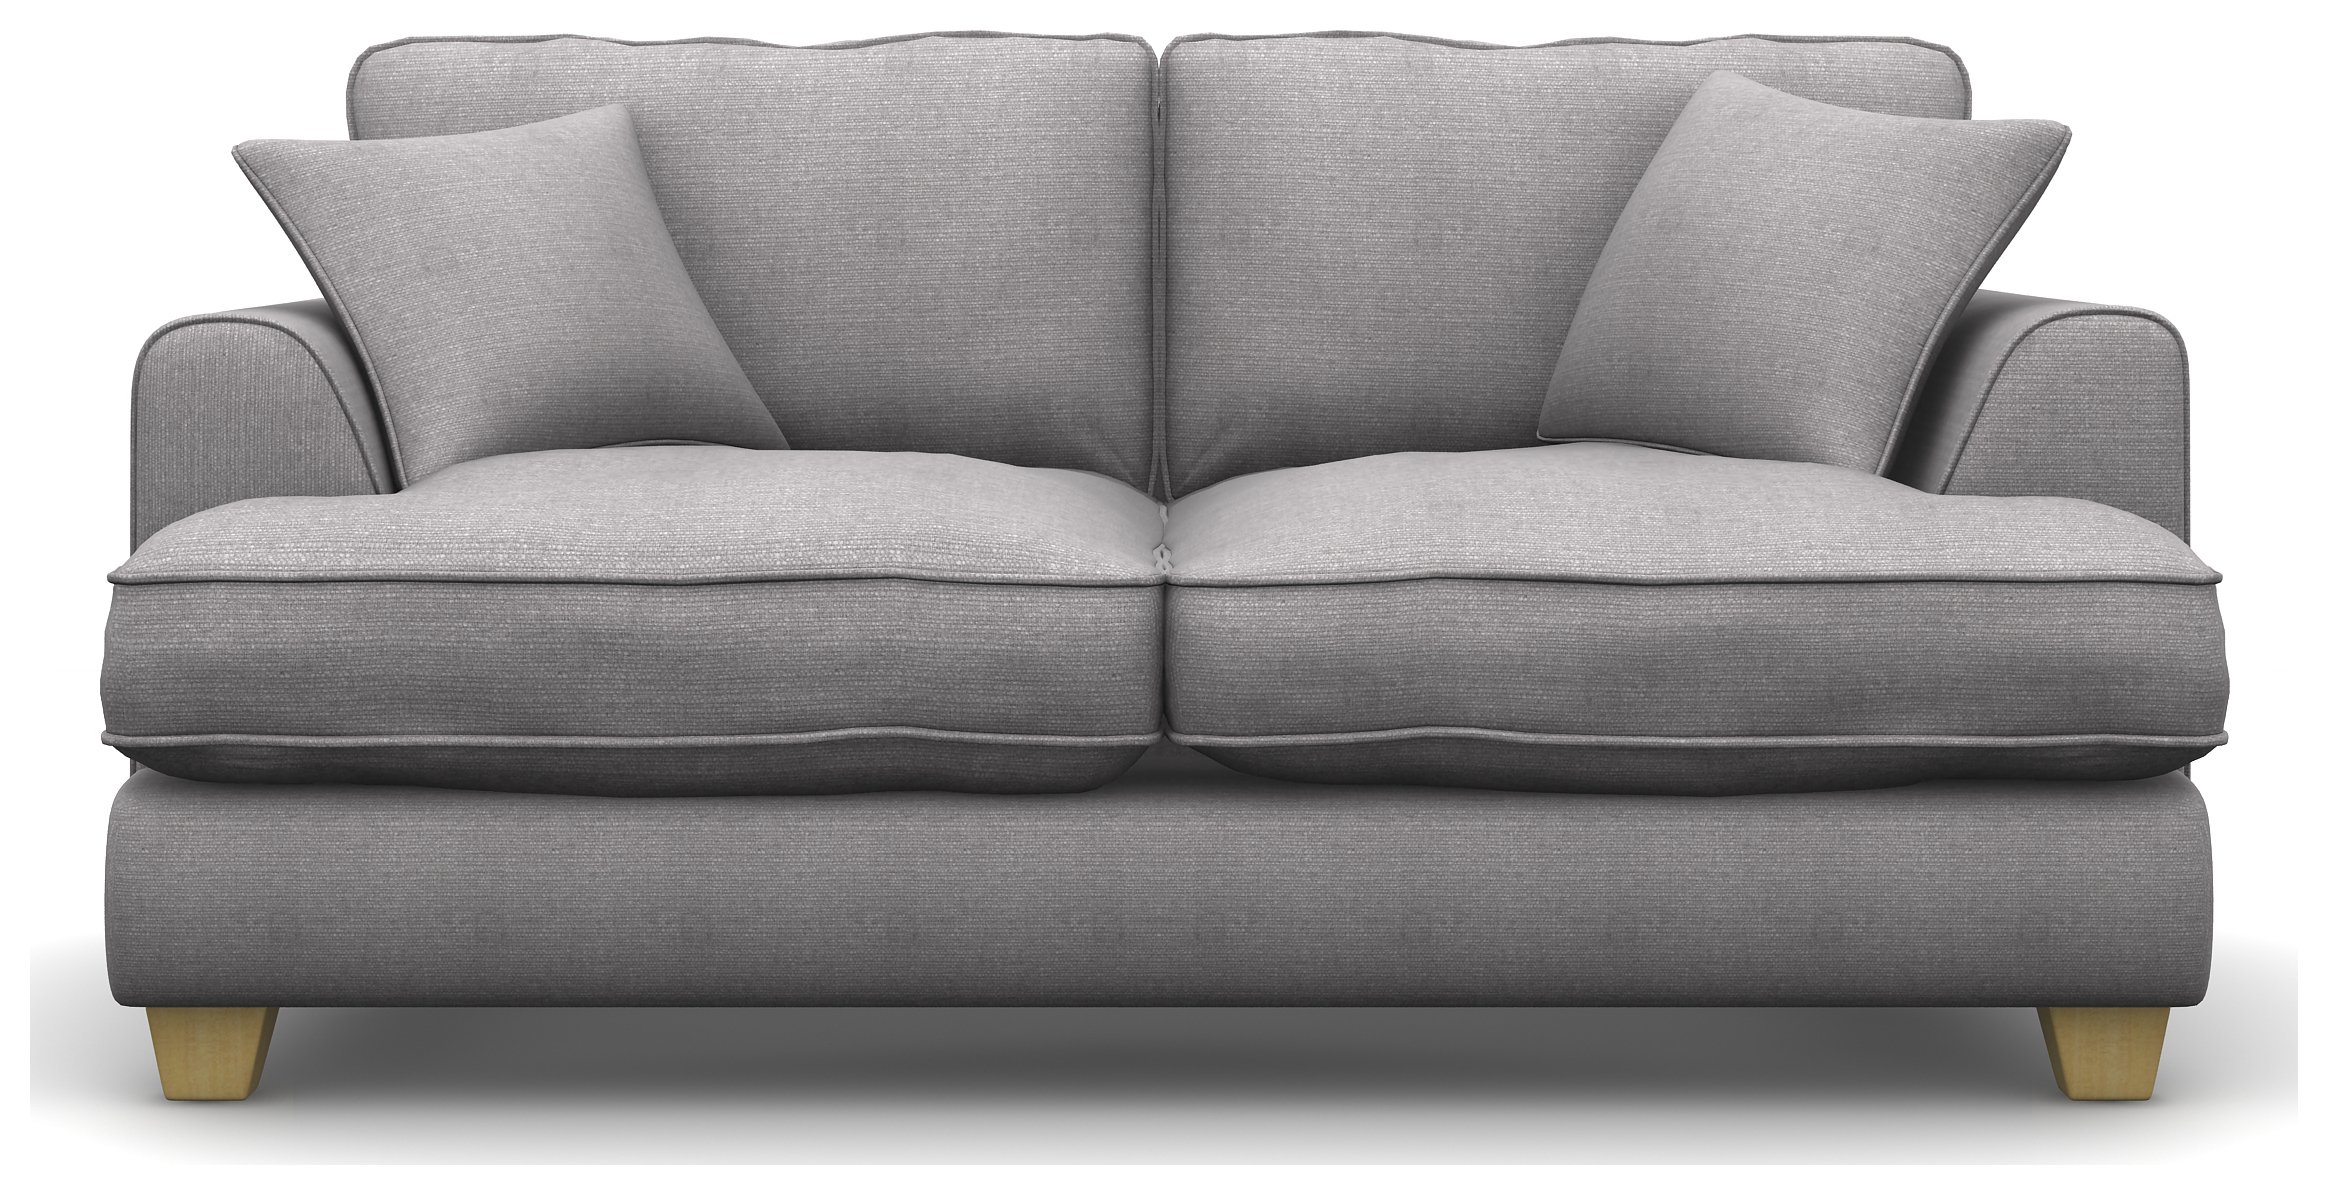 heart of house sofa bed